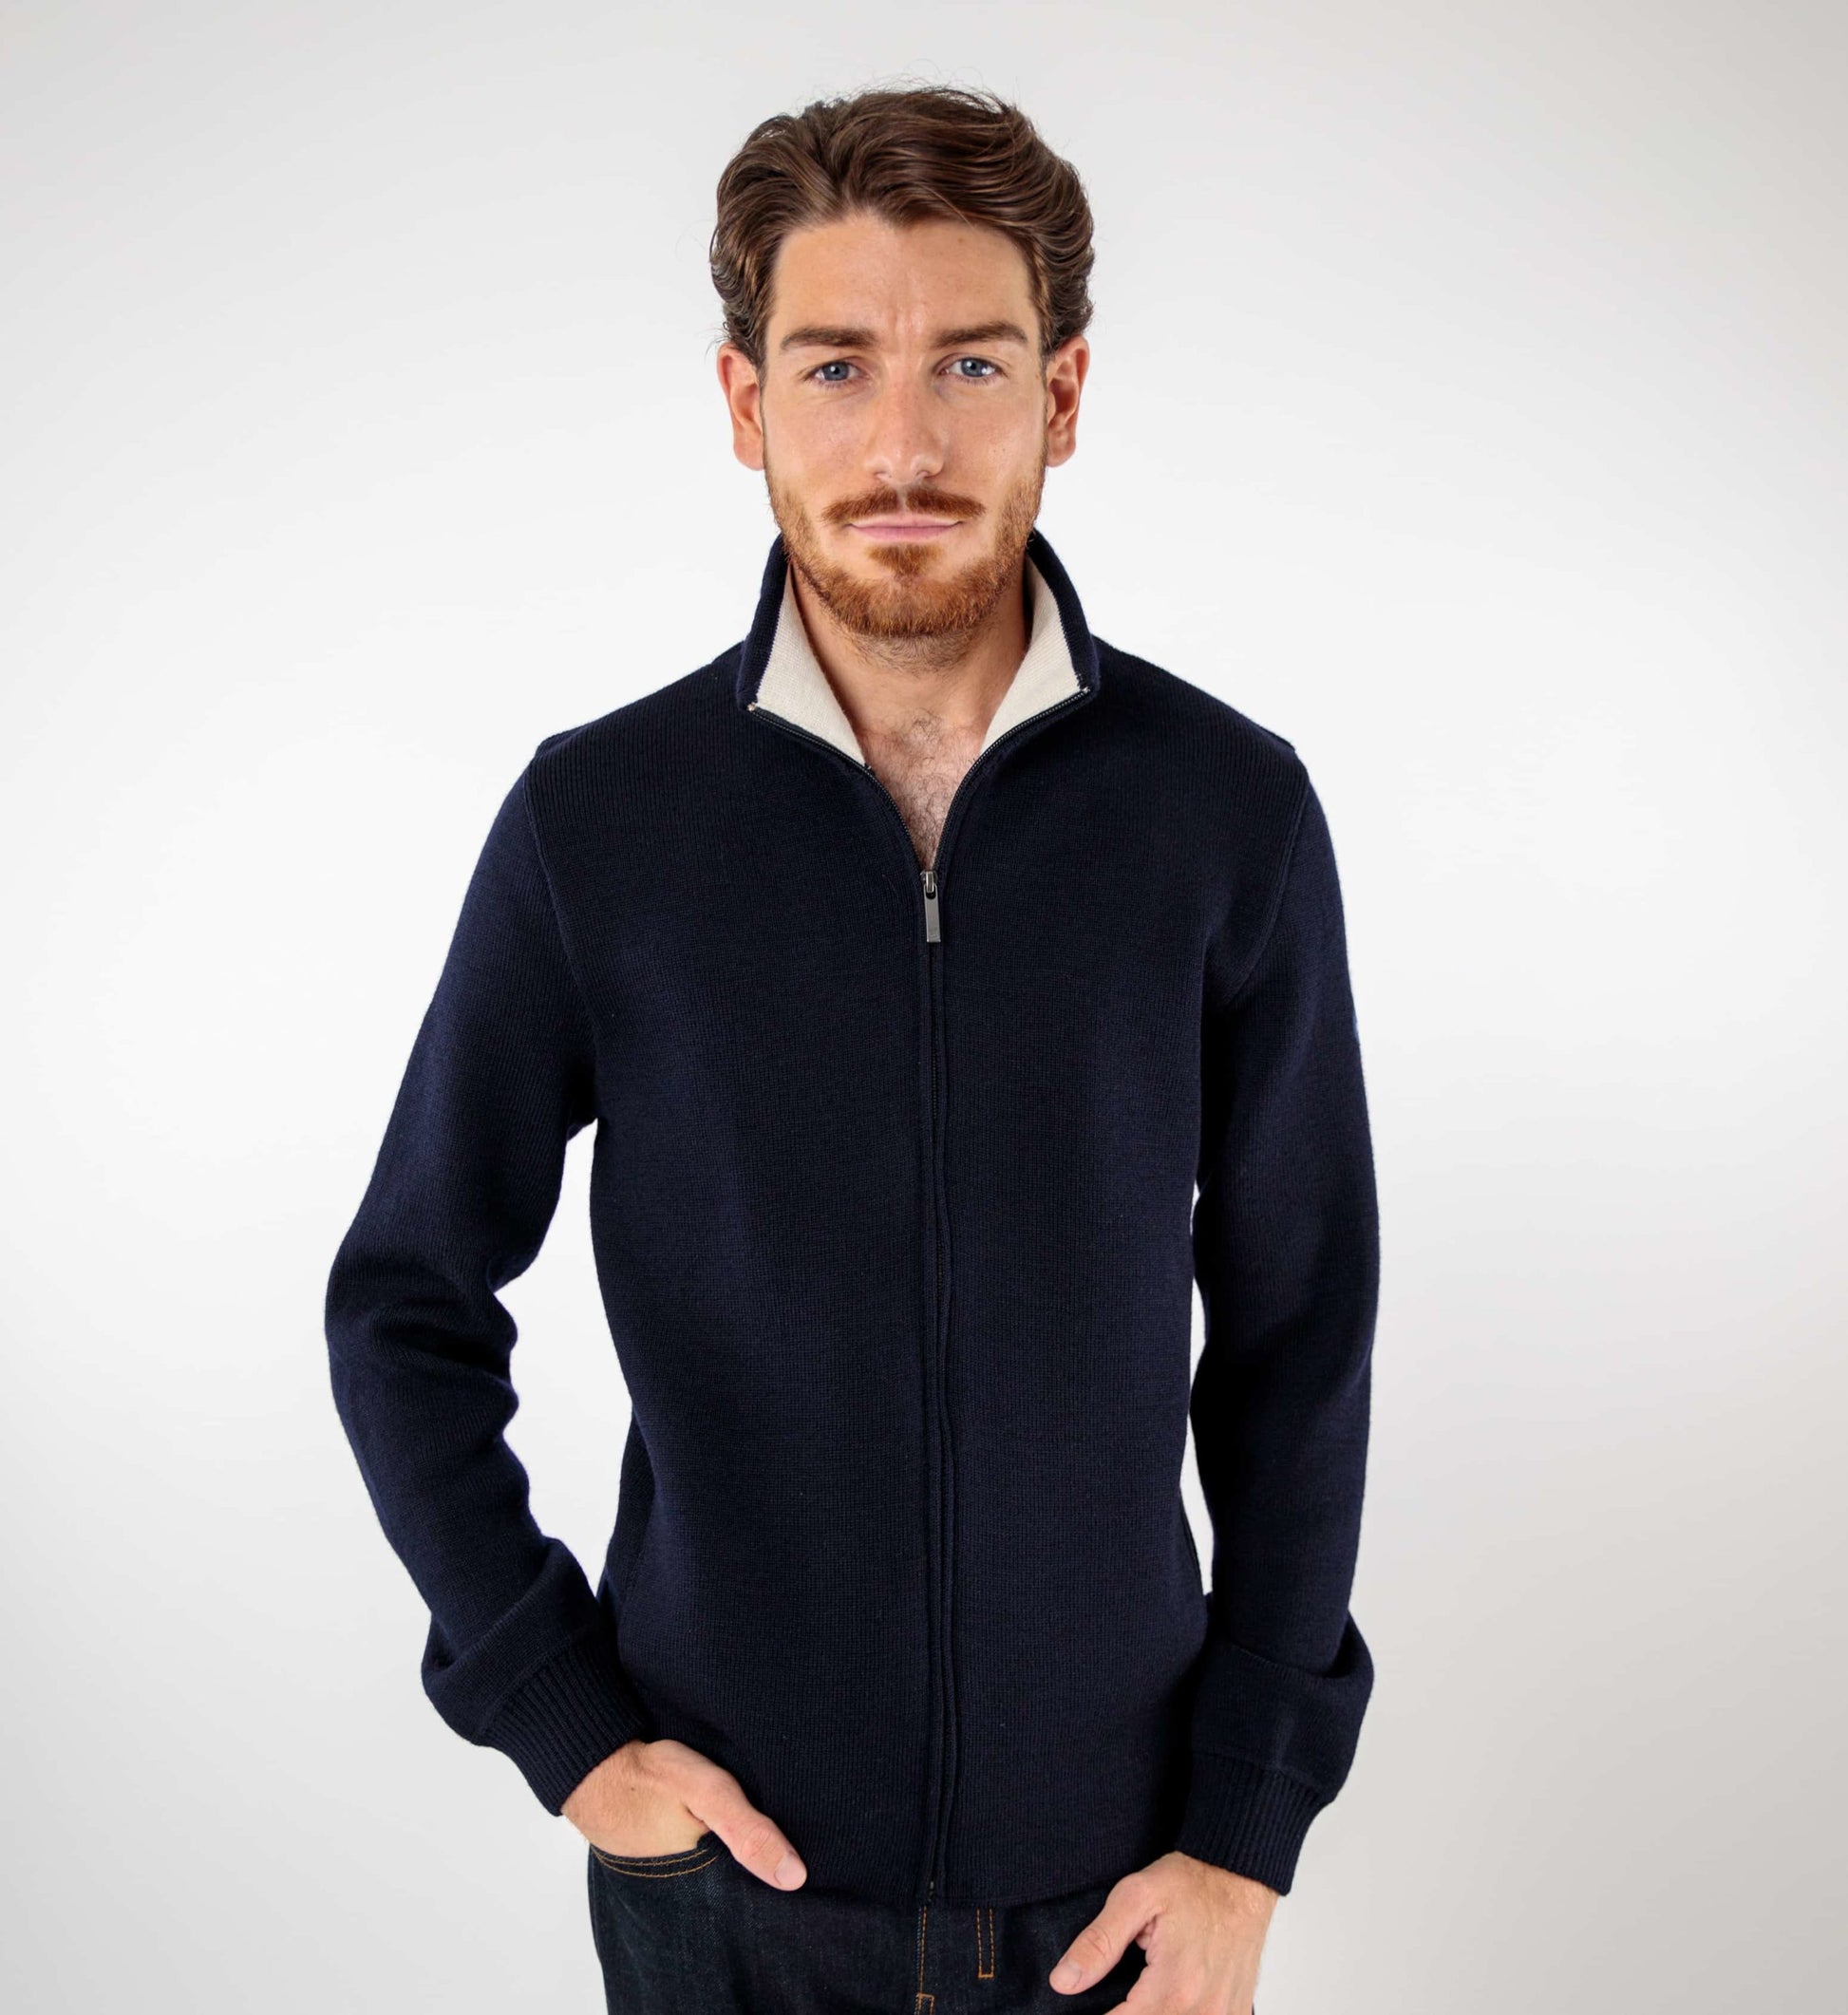 Zipped wool jacket with stand-up collar